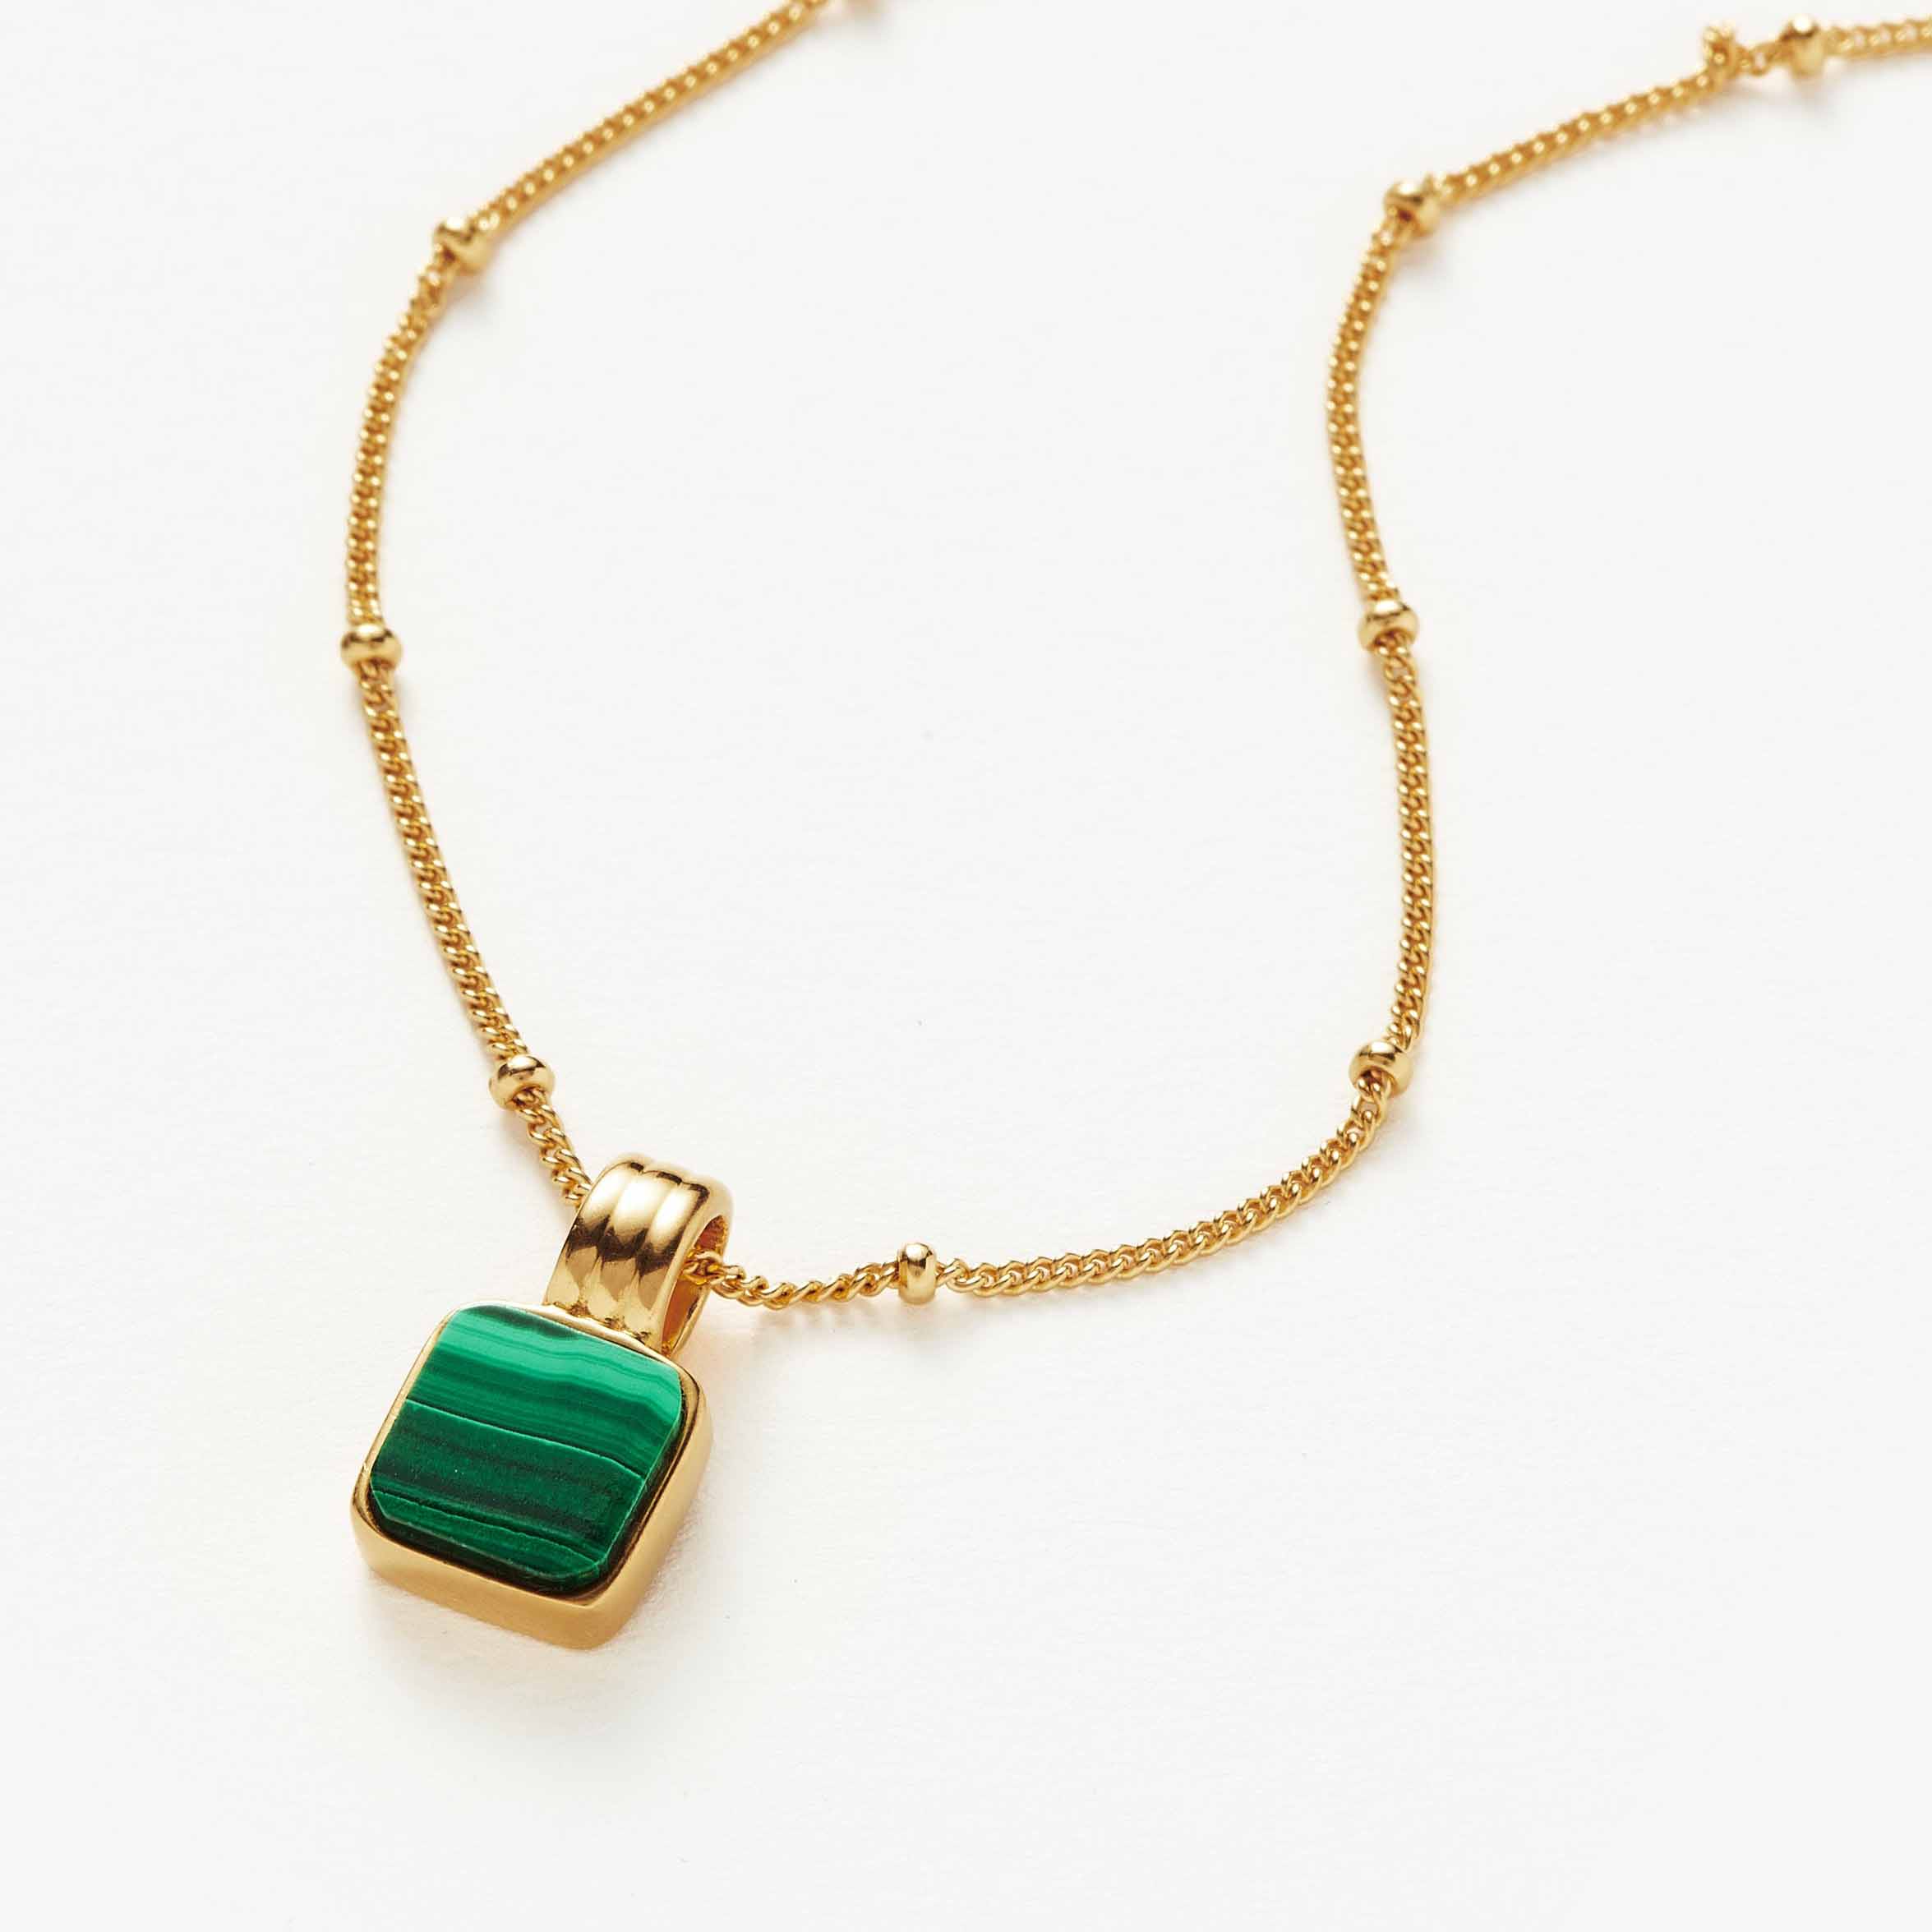 Custom wholesale square malachite necklaces in 18k gold plated on 925 sterling silver